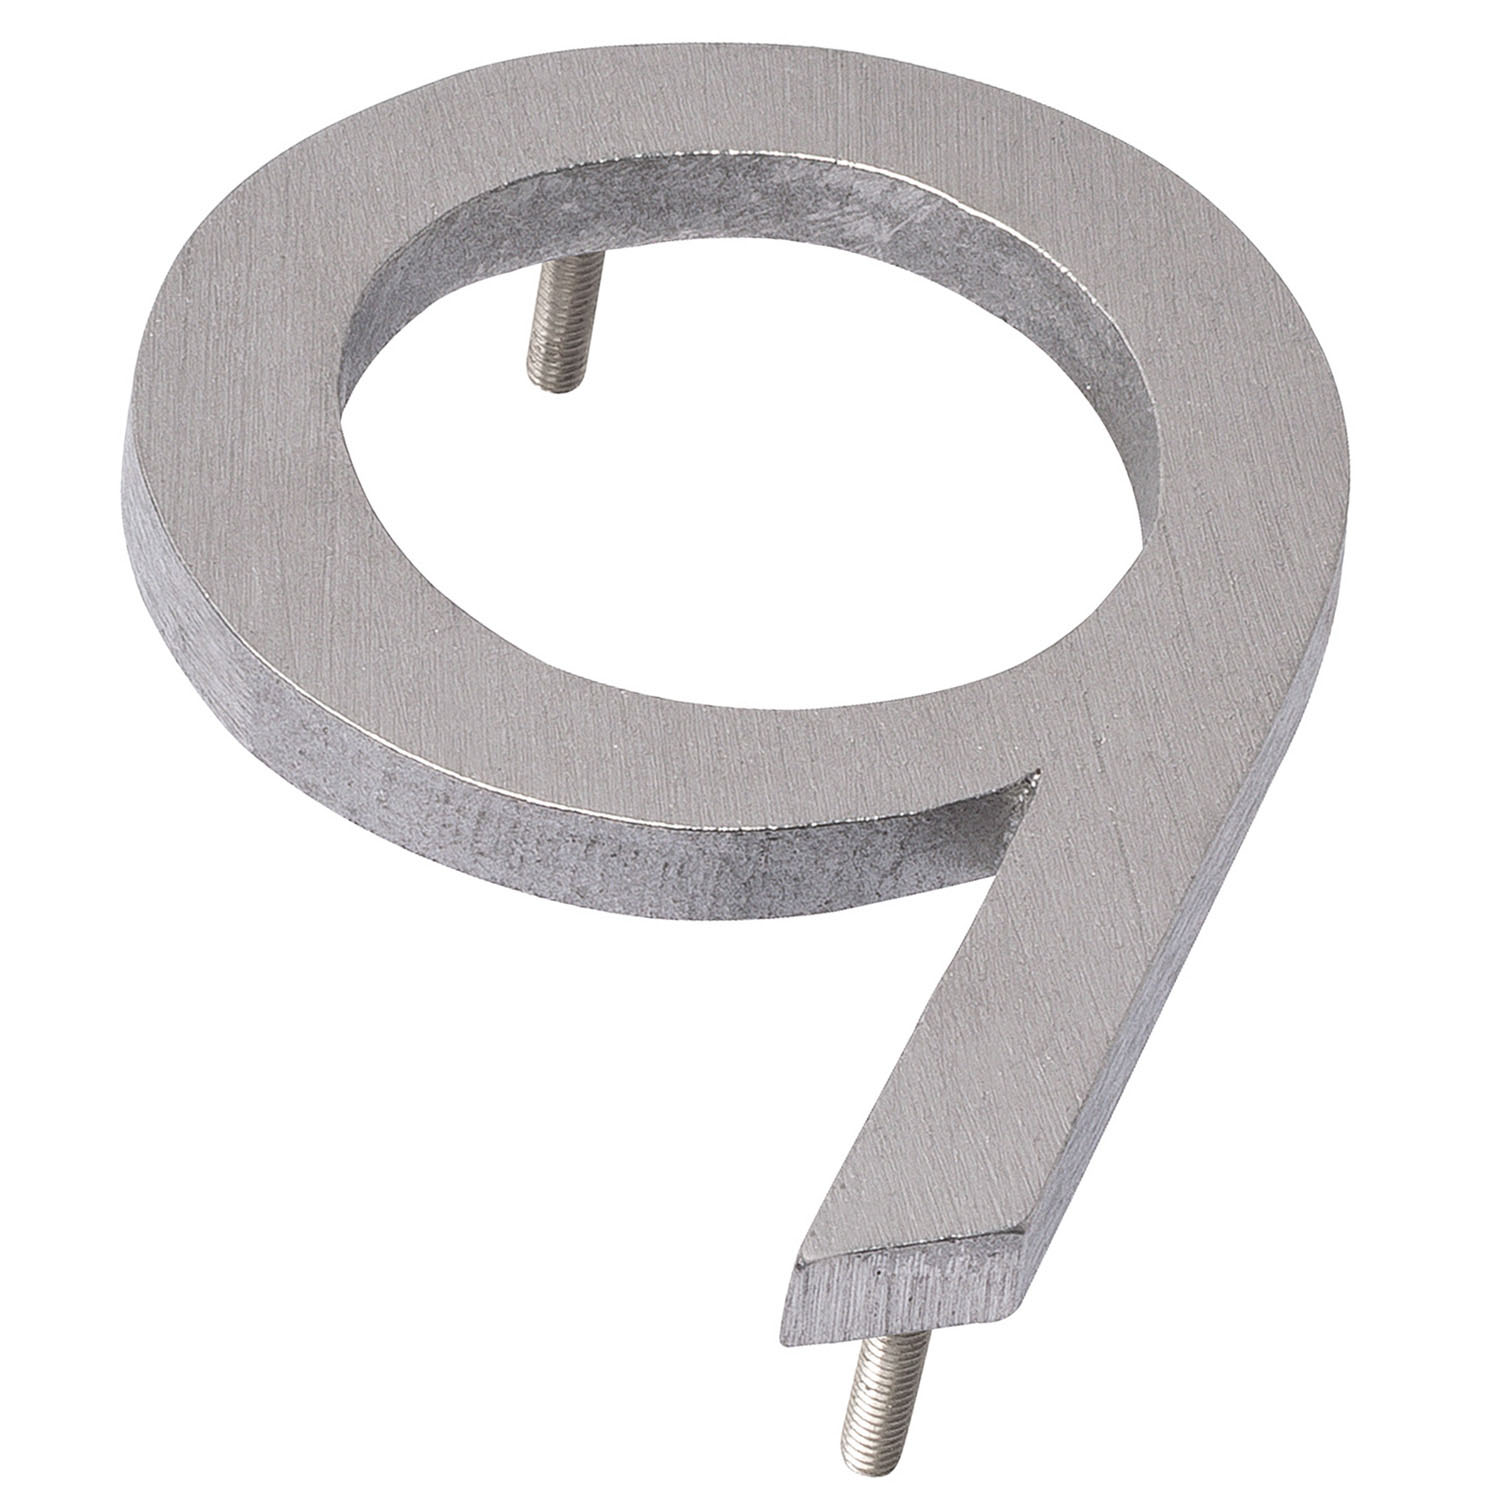 10 Inch Modern House Numbers Address Numbers Architectural 